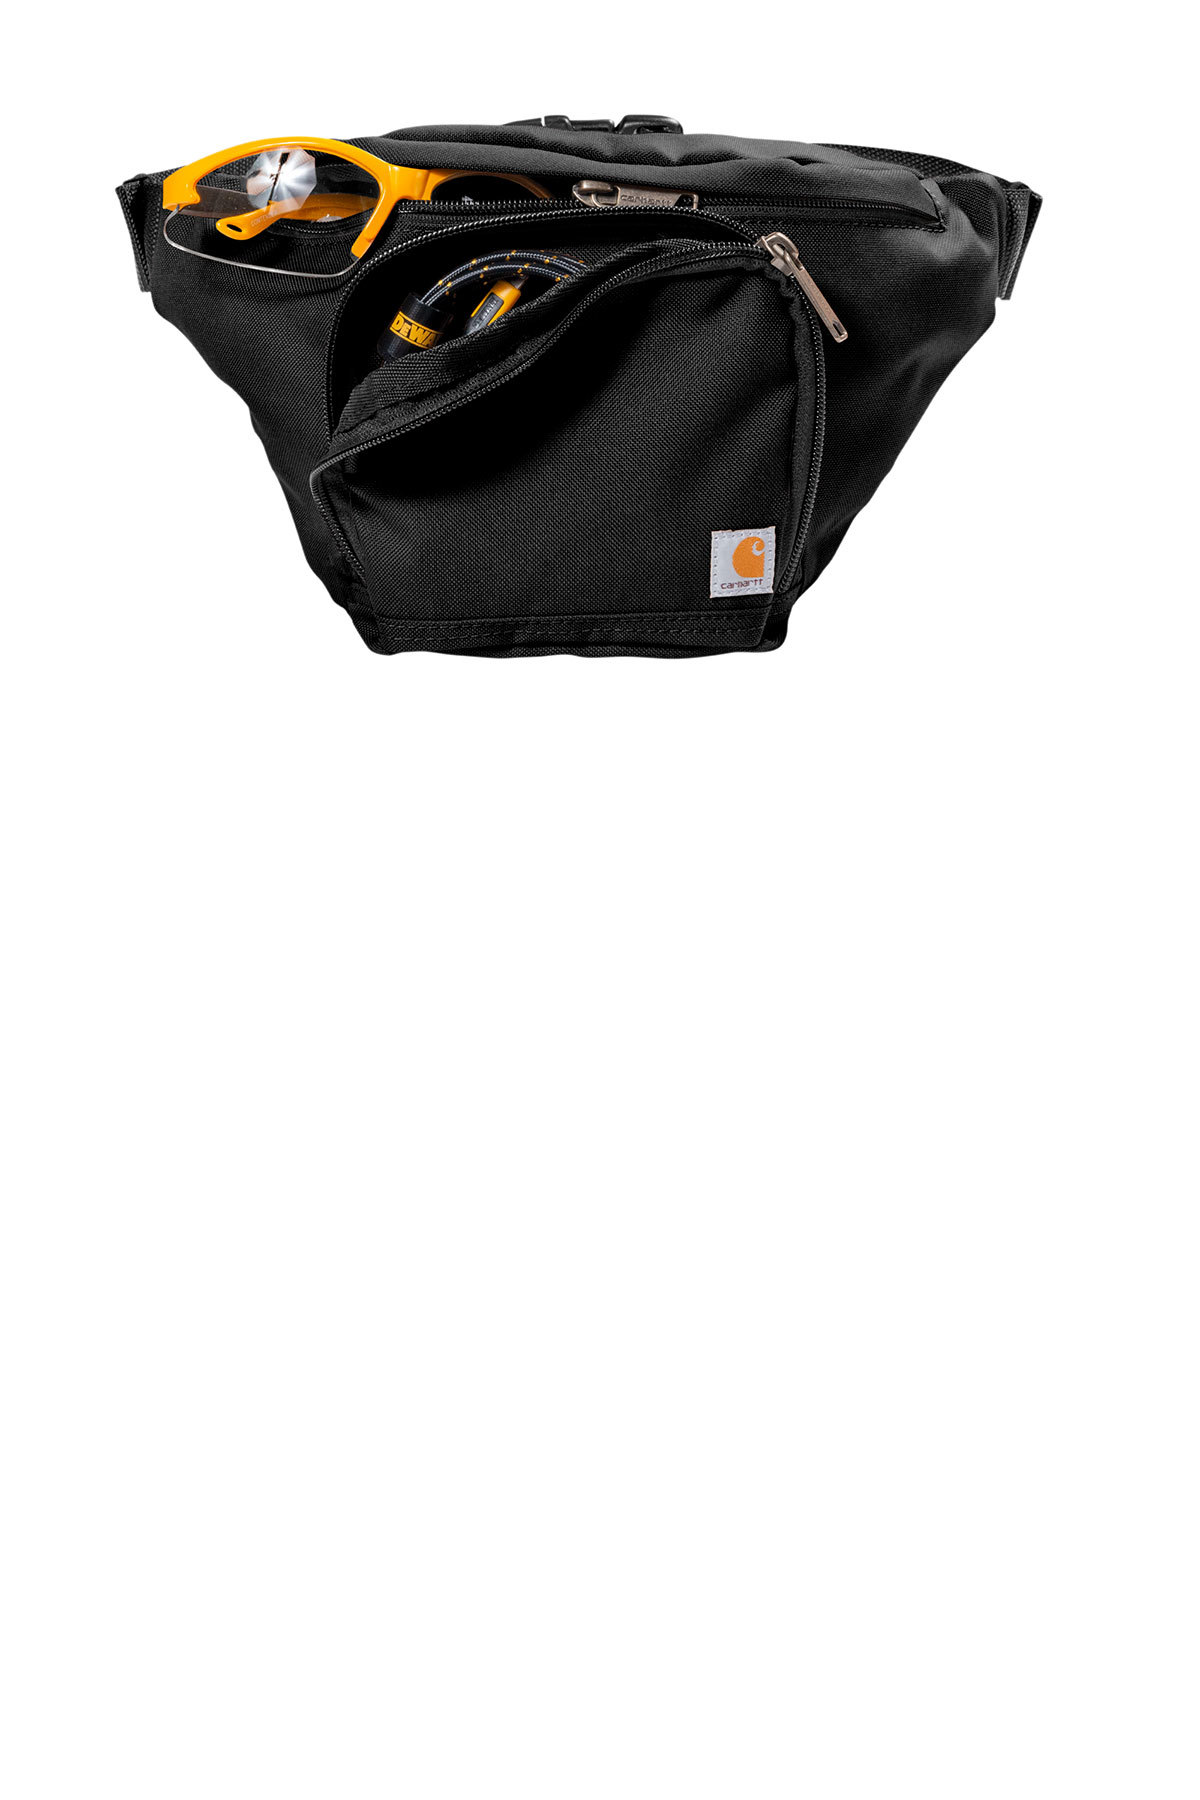 Carhartt Waist Pack | Product | Company Casuals